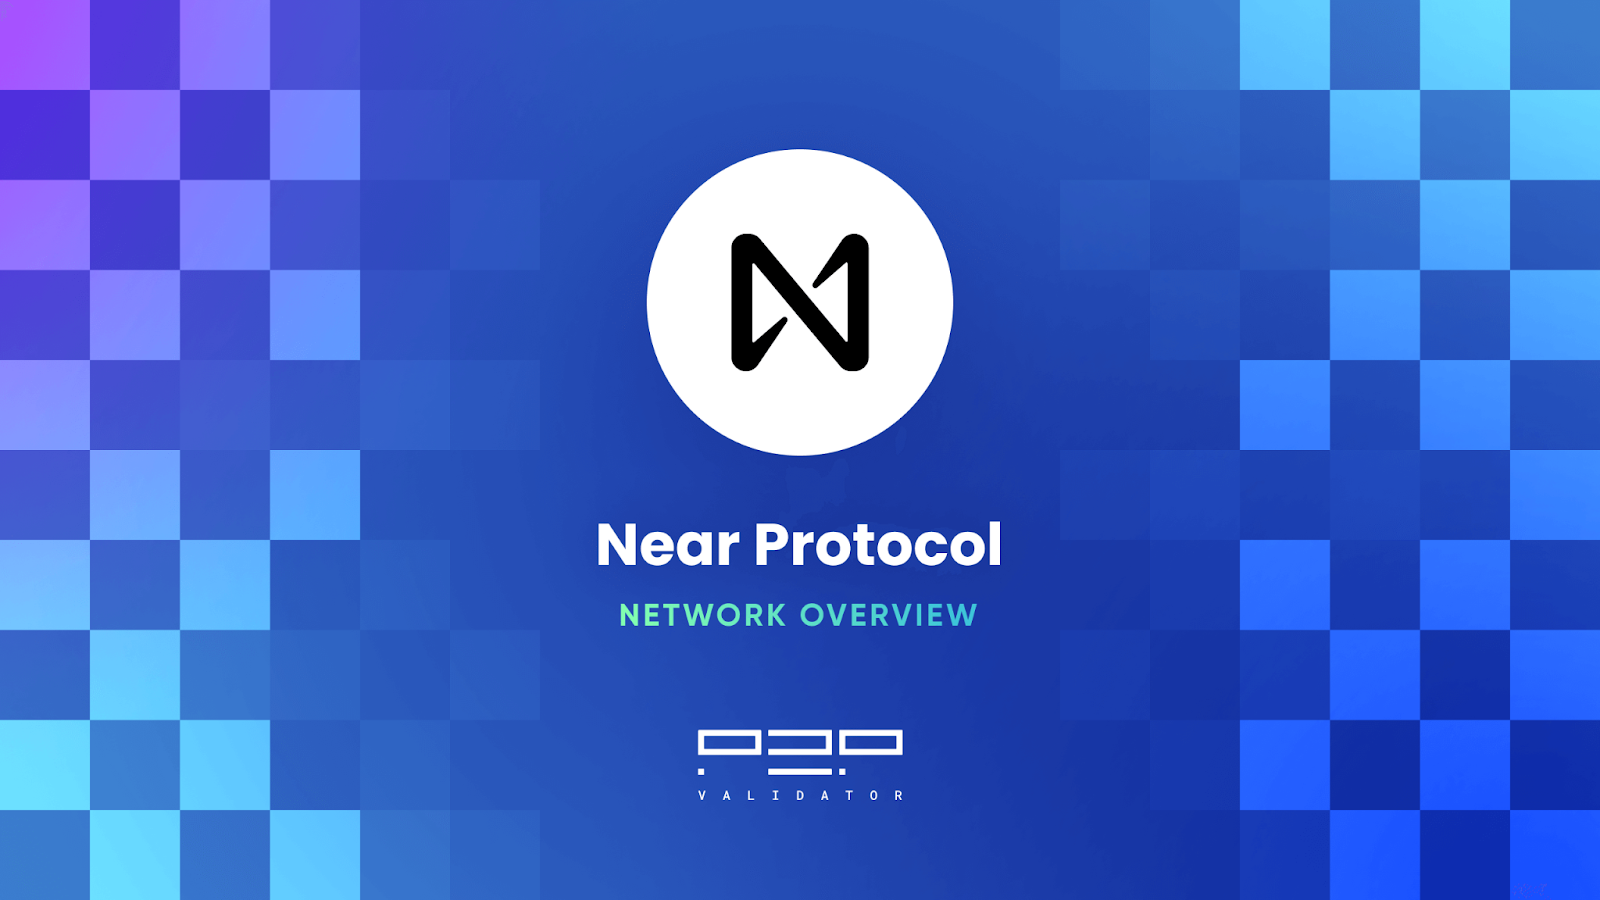 NEAR Protocol - Network Overview